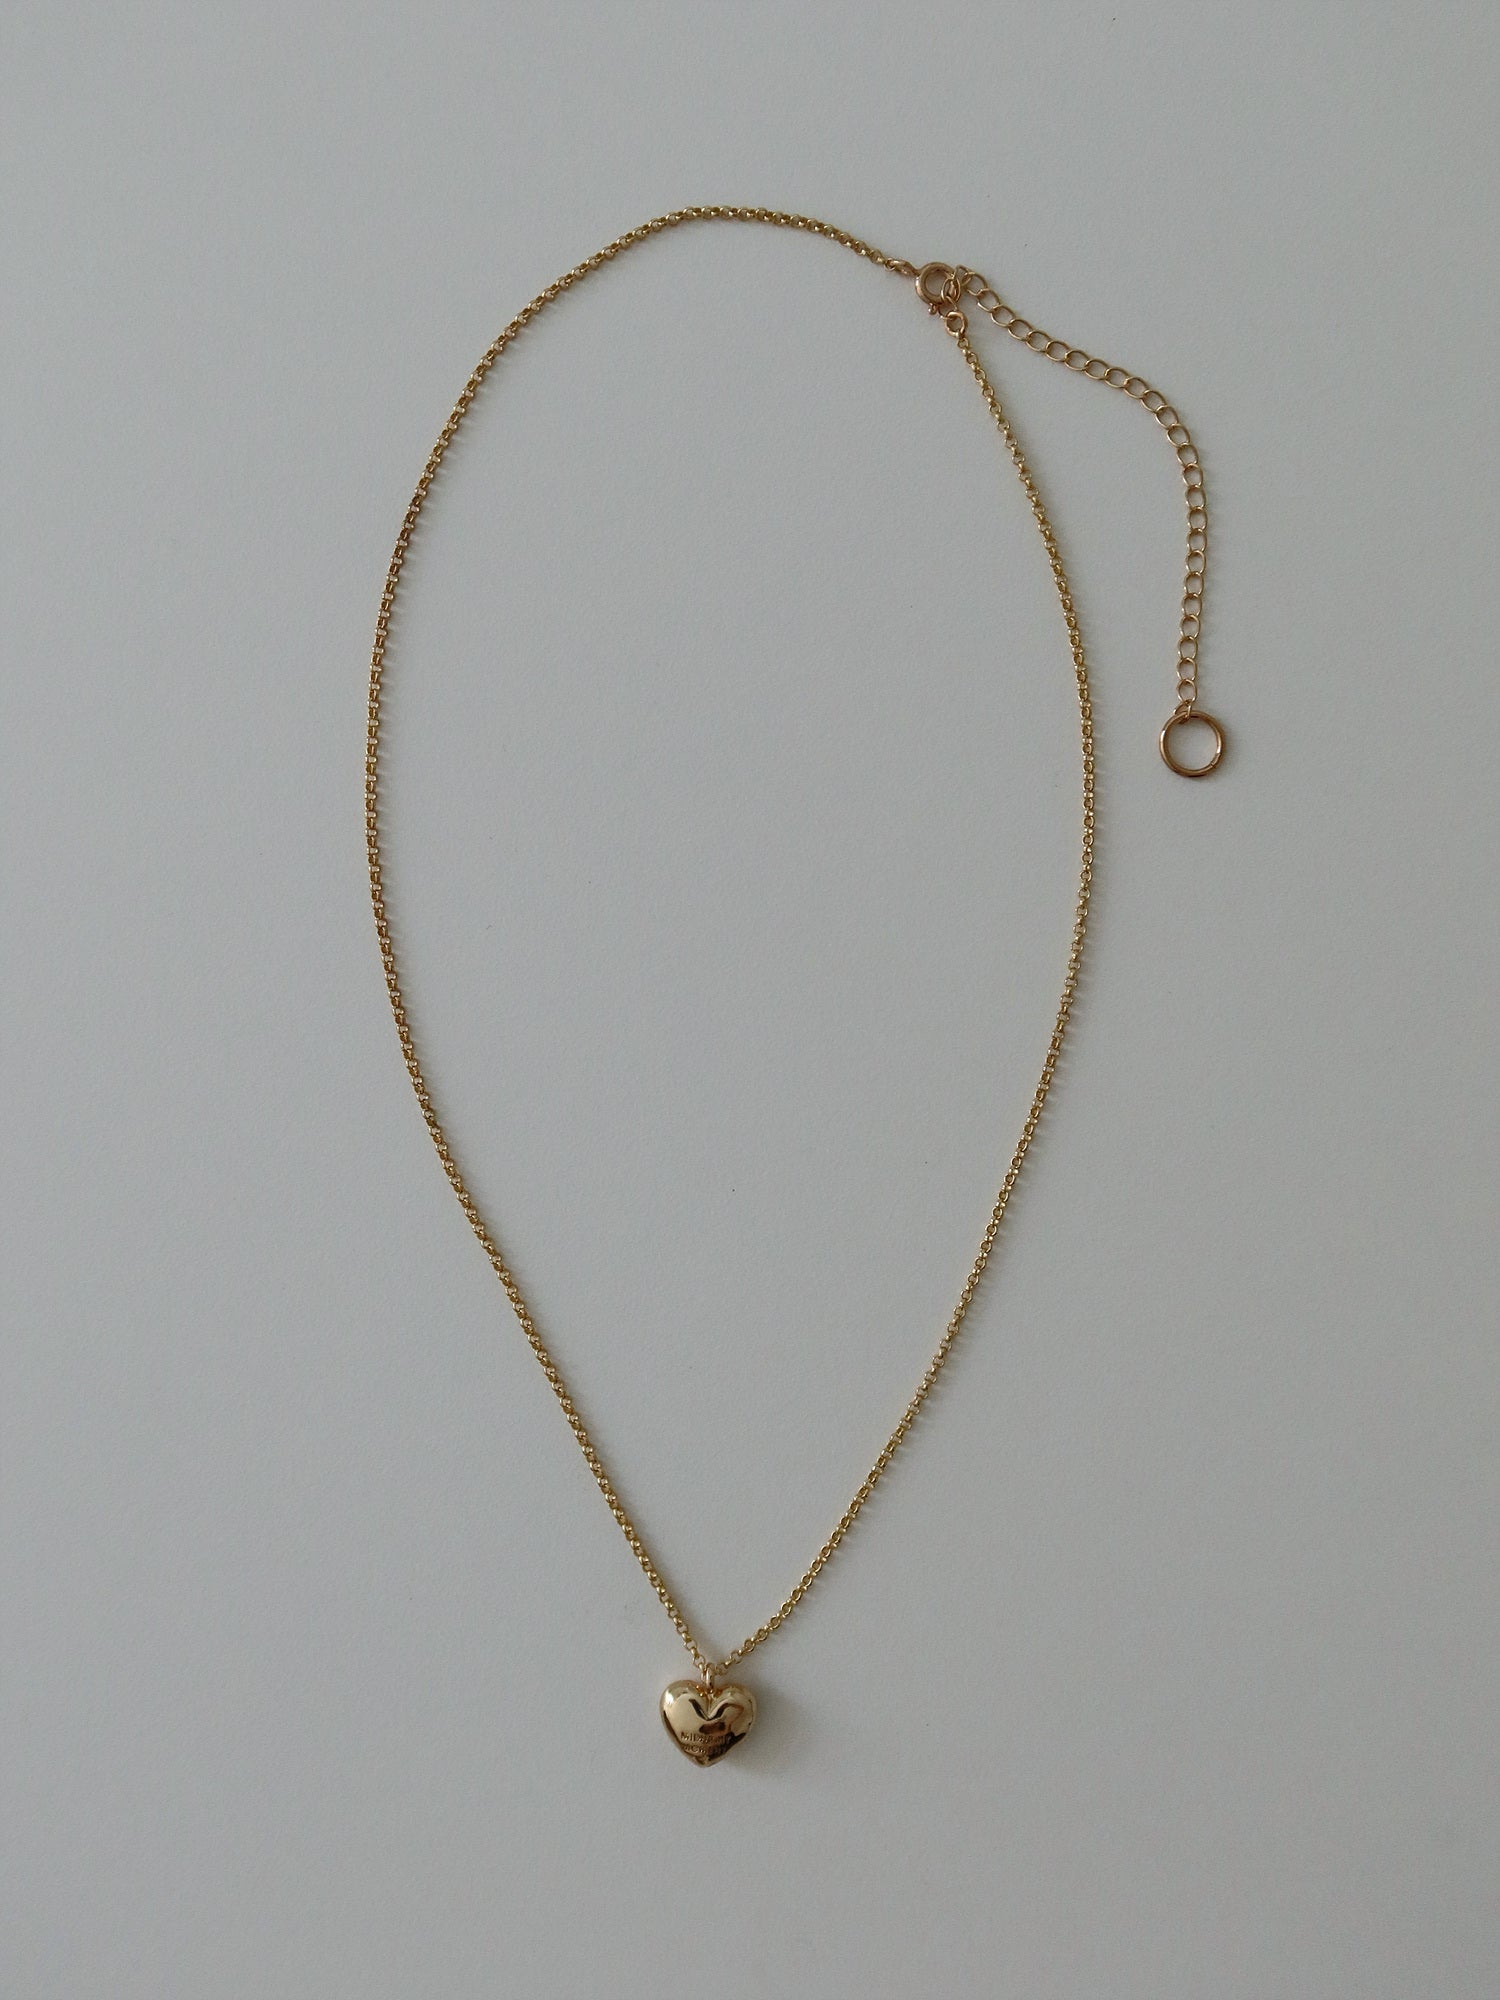 Lovable necklace - gold